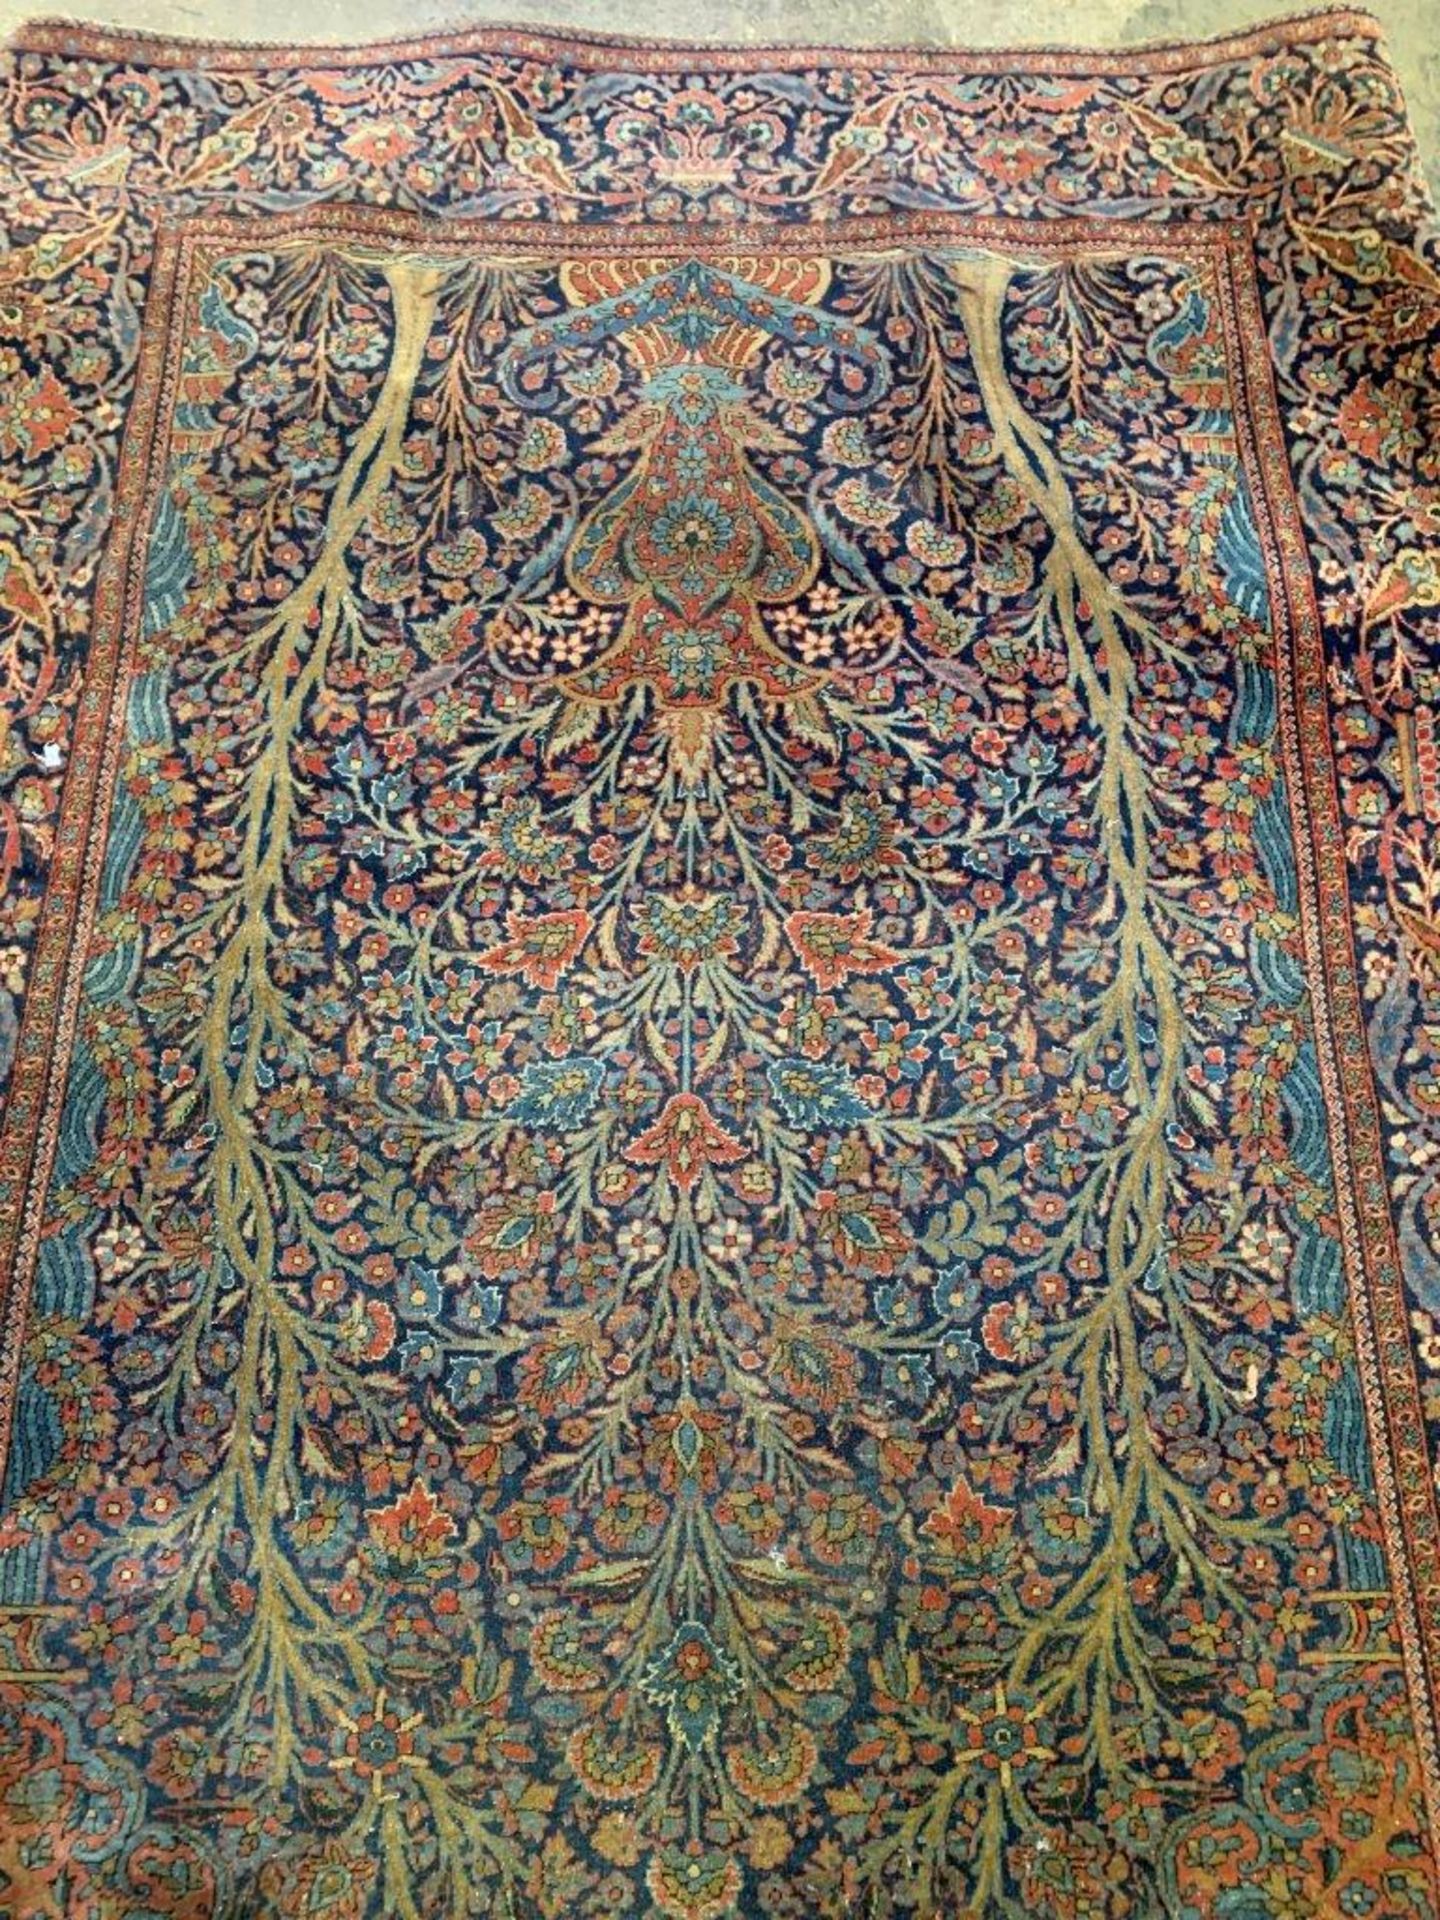 Two blue ground rugs